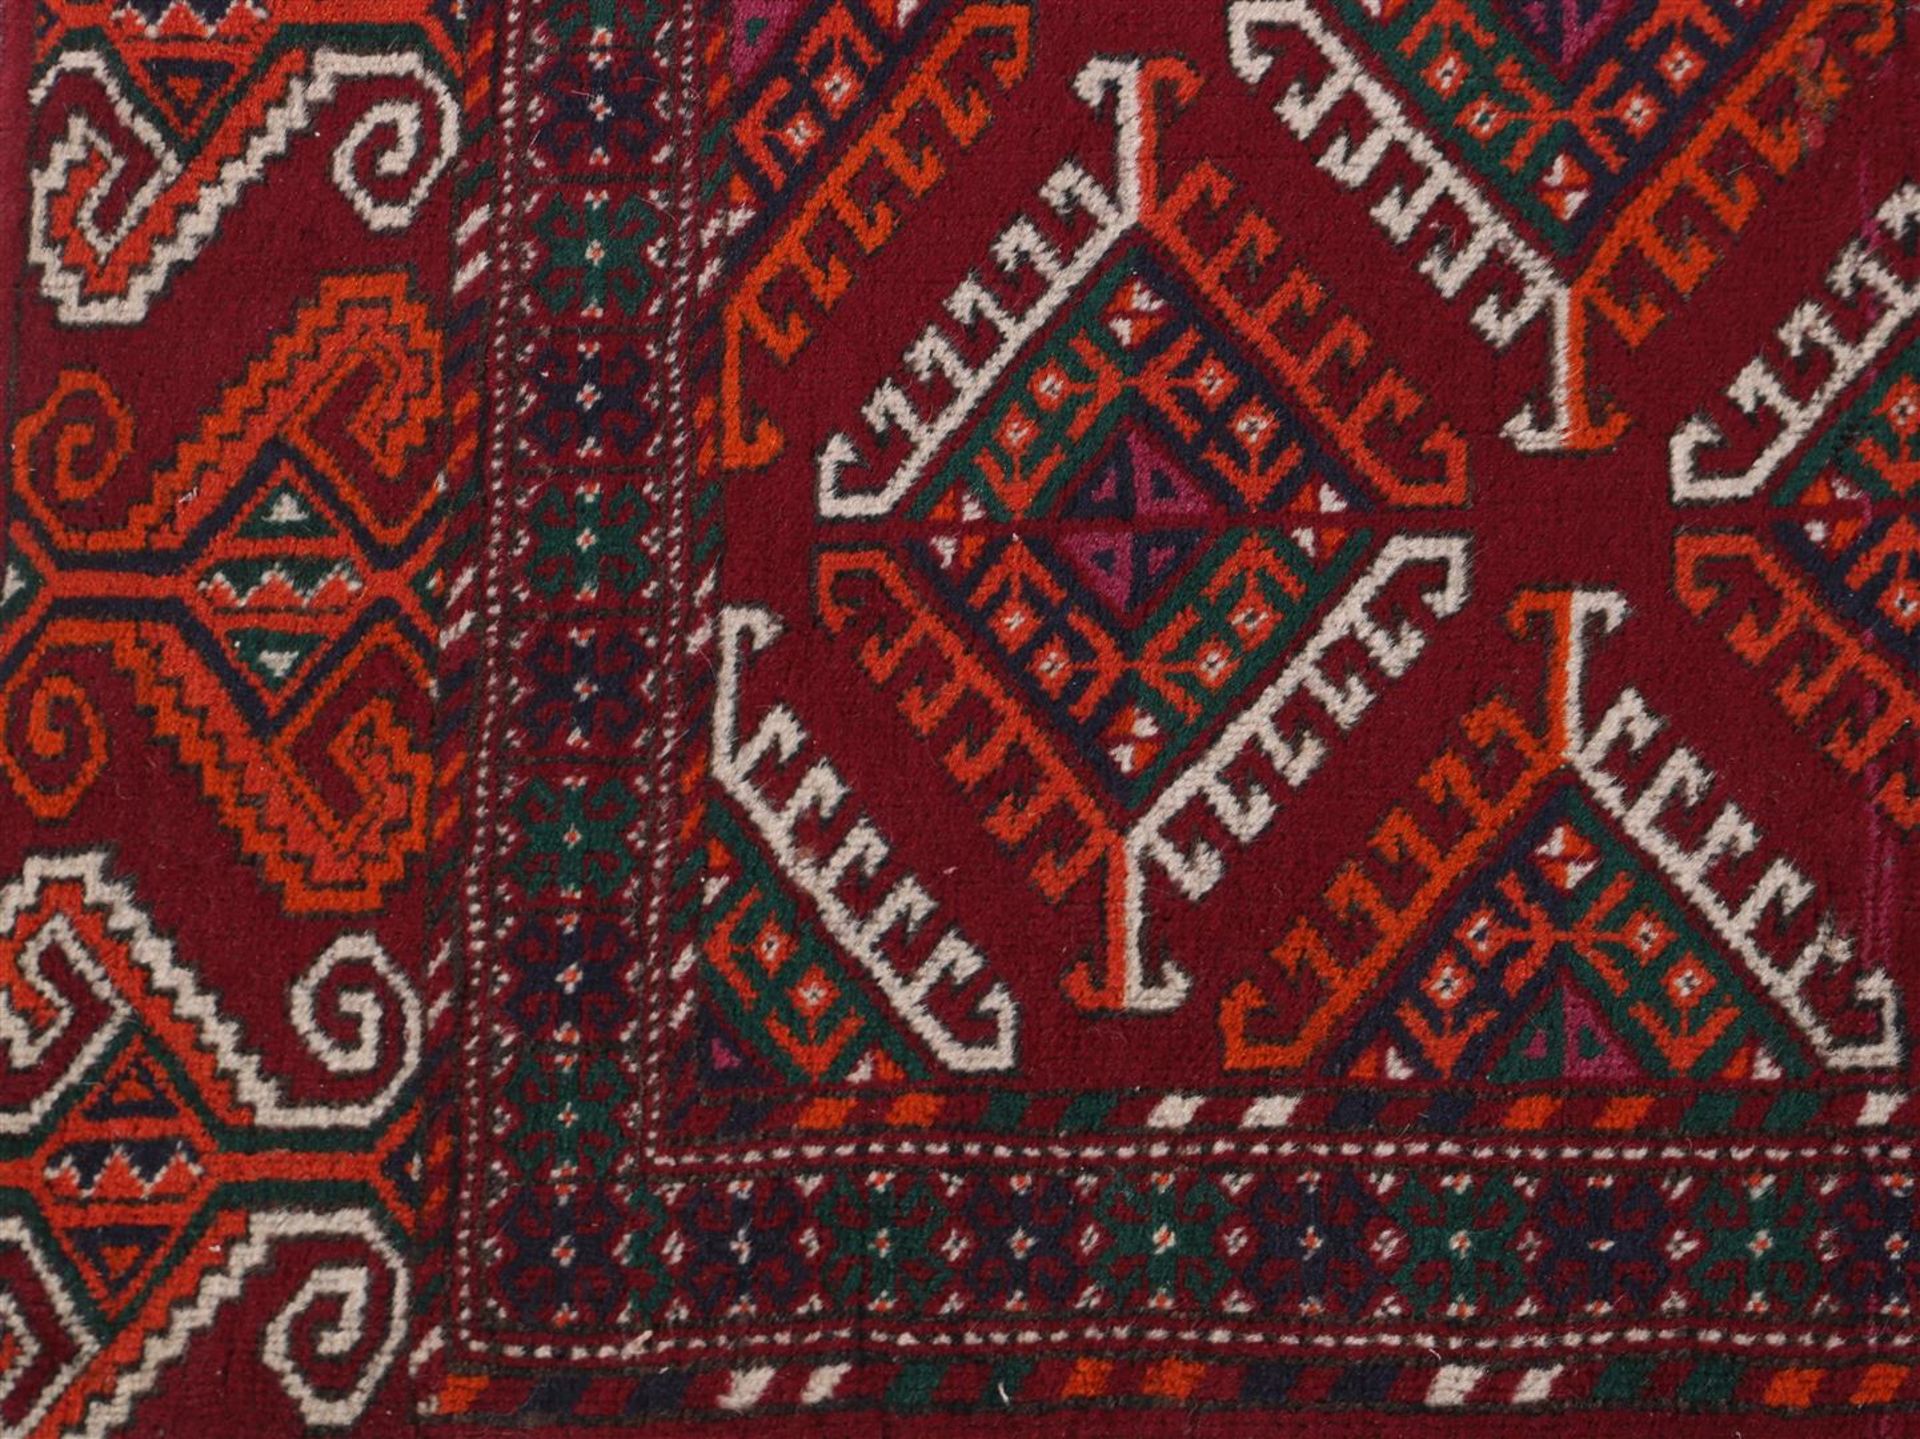 Hand-knotted oriental carpet, Turkmenistan - Image 3 of 4